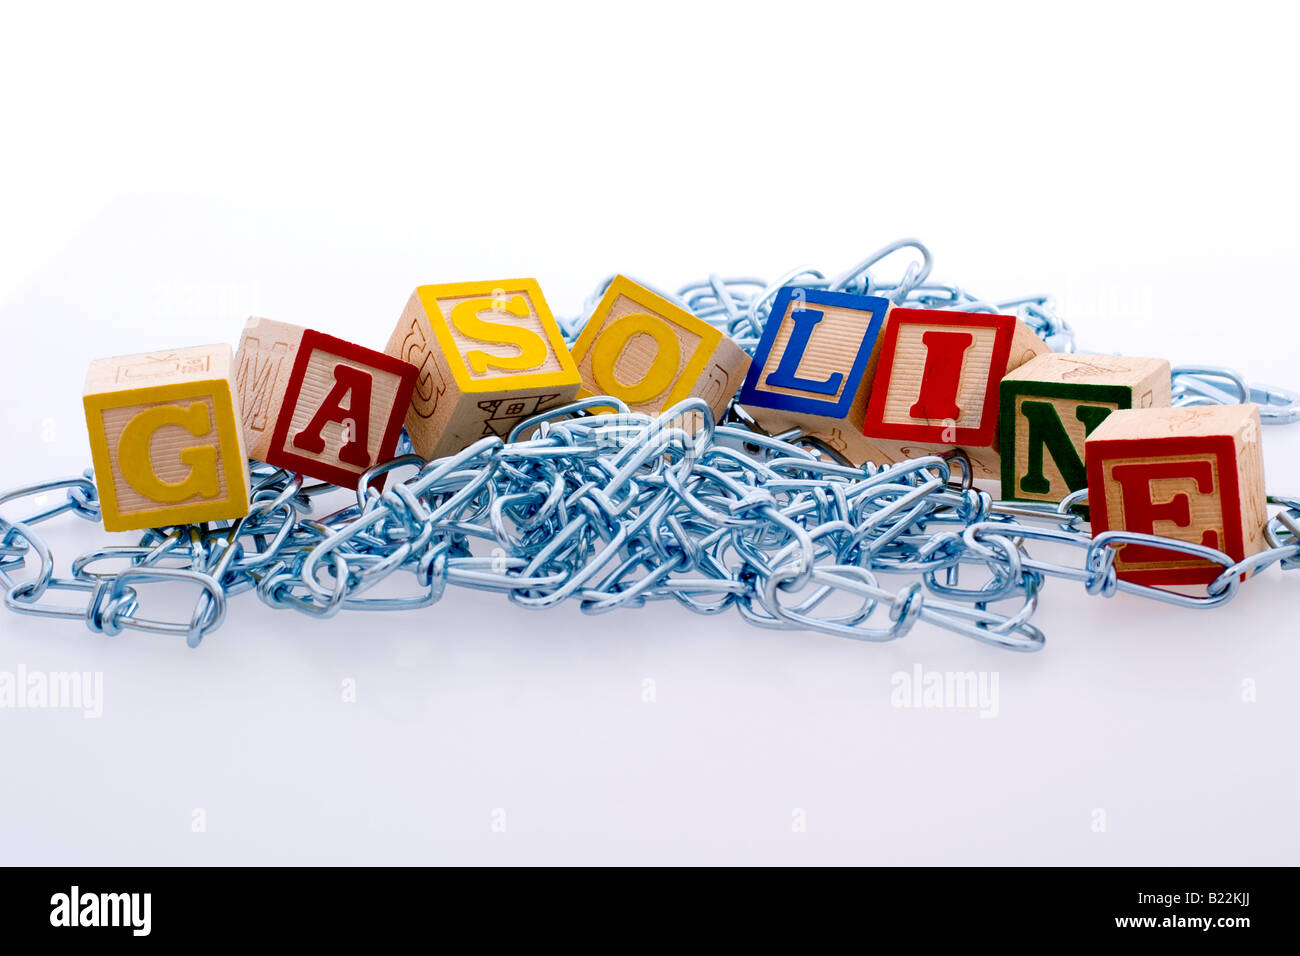 Children's blocks spelling out 'gasoline' atop a pile of metal chains Stock Photo